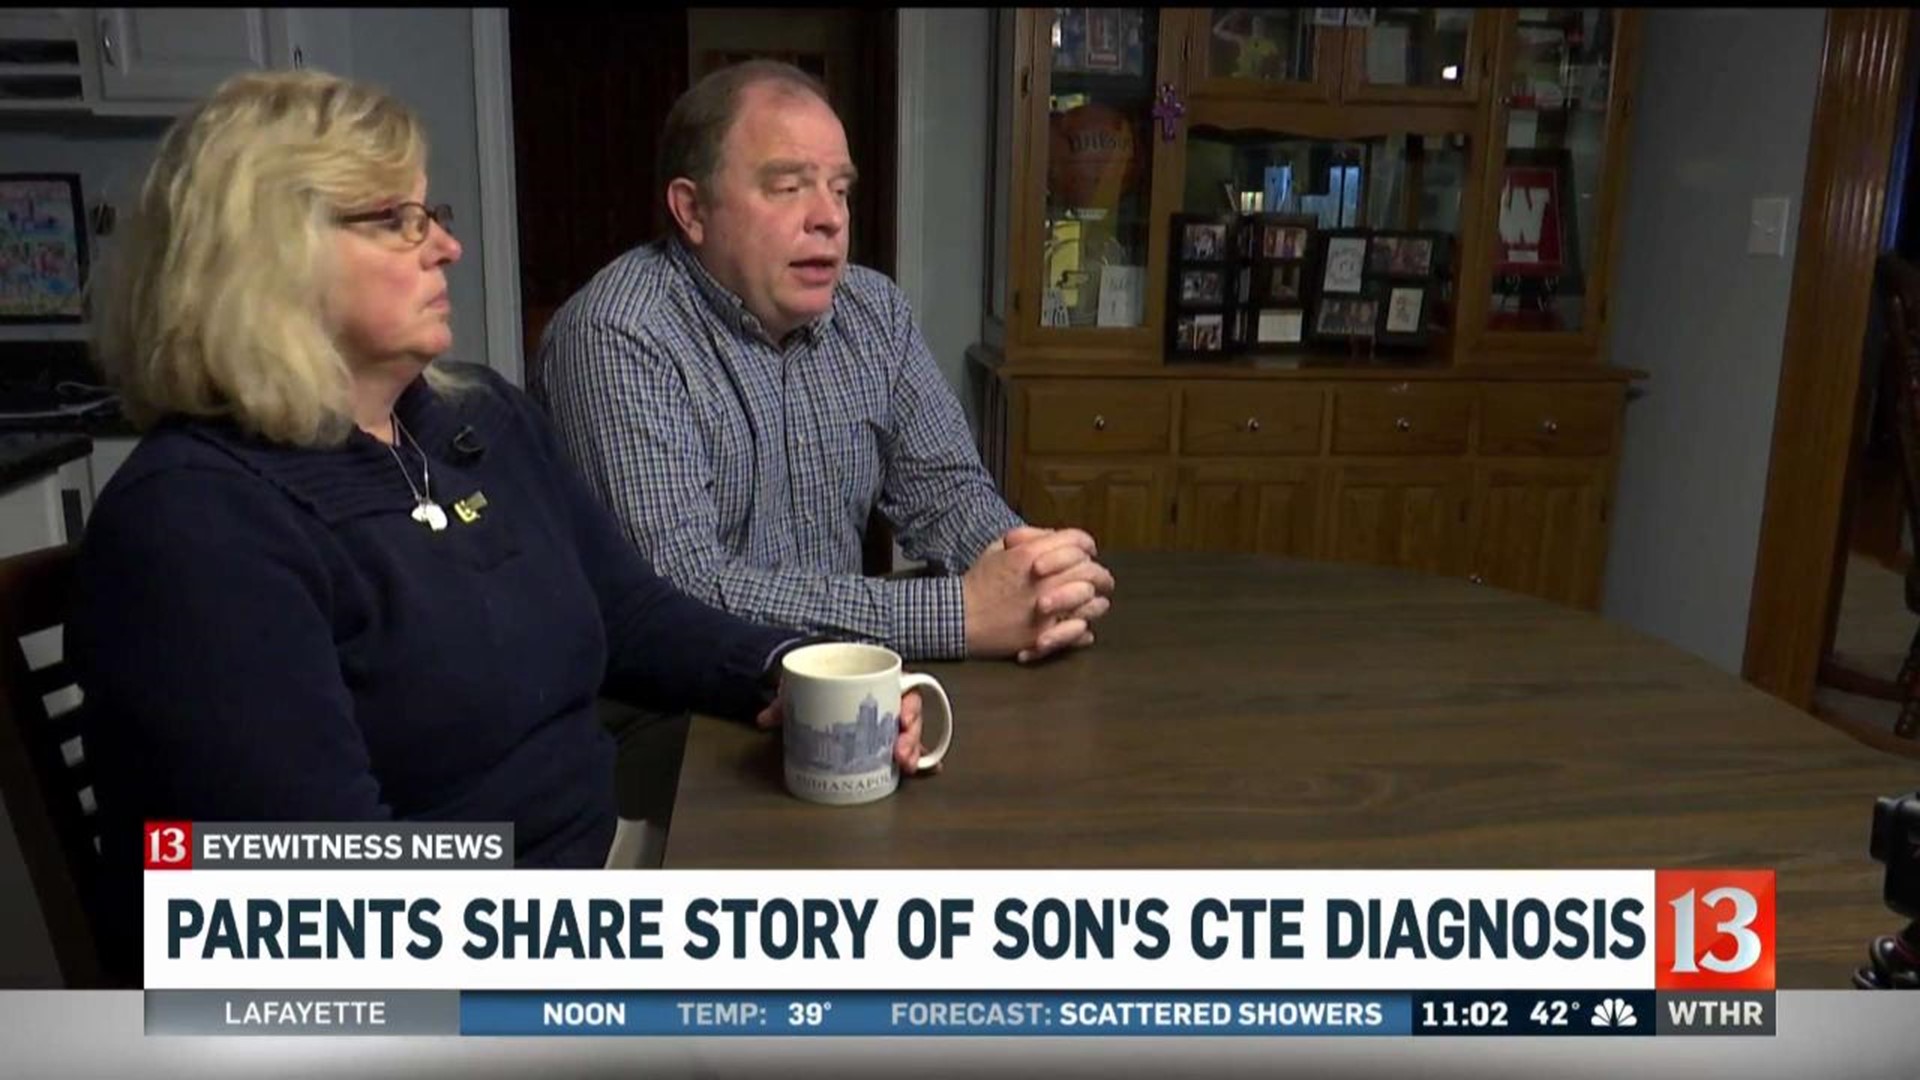 Parents share story of son's CTE diagnosis